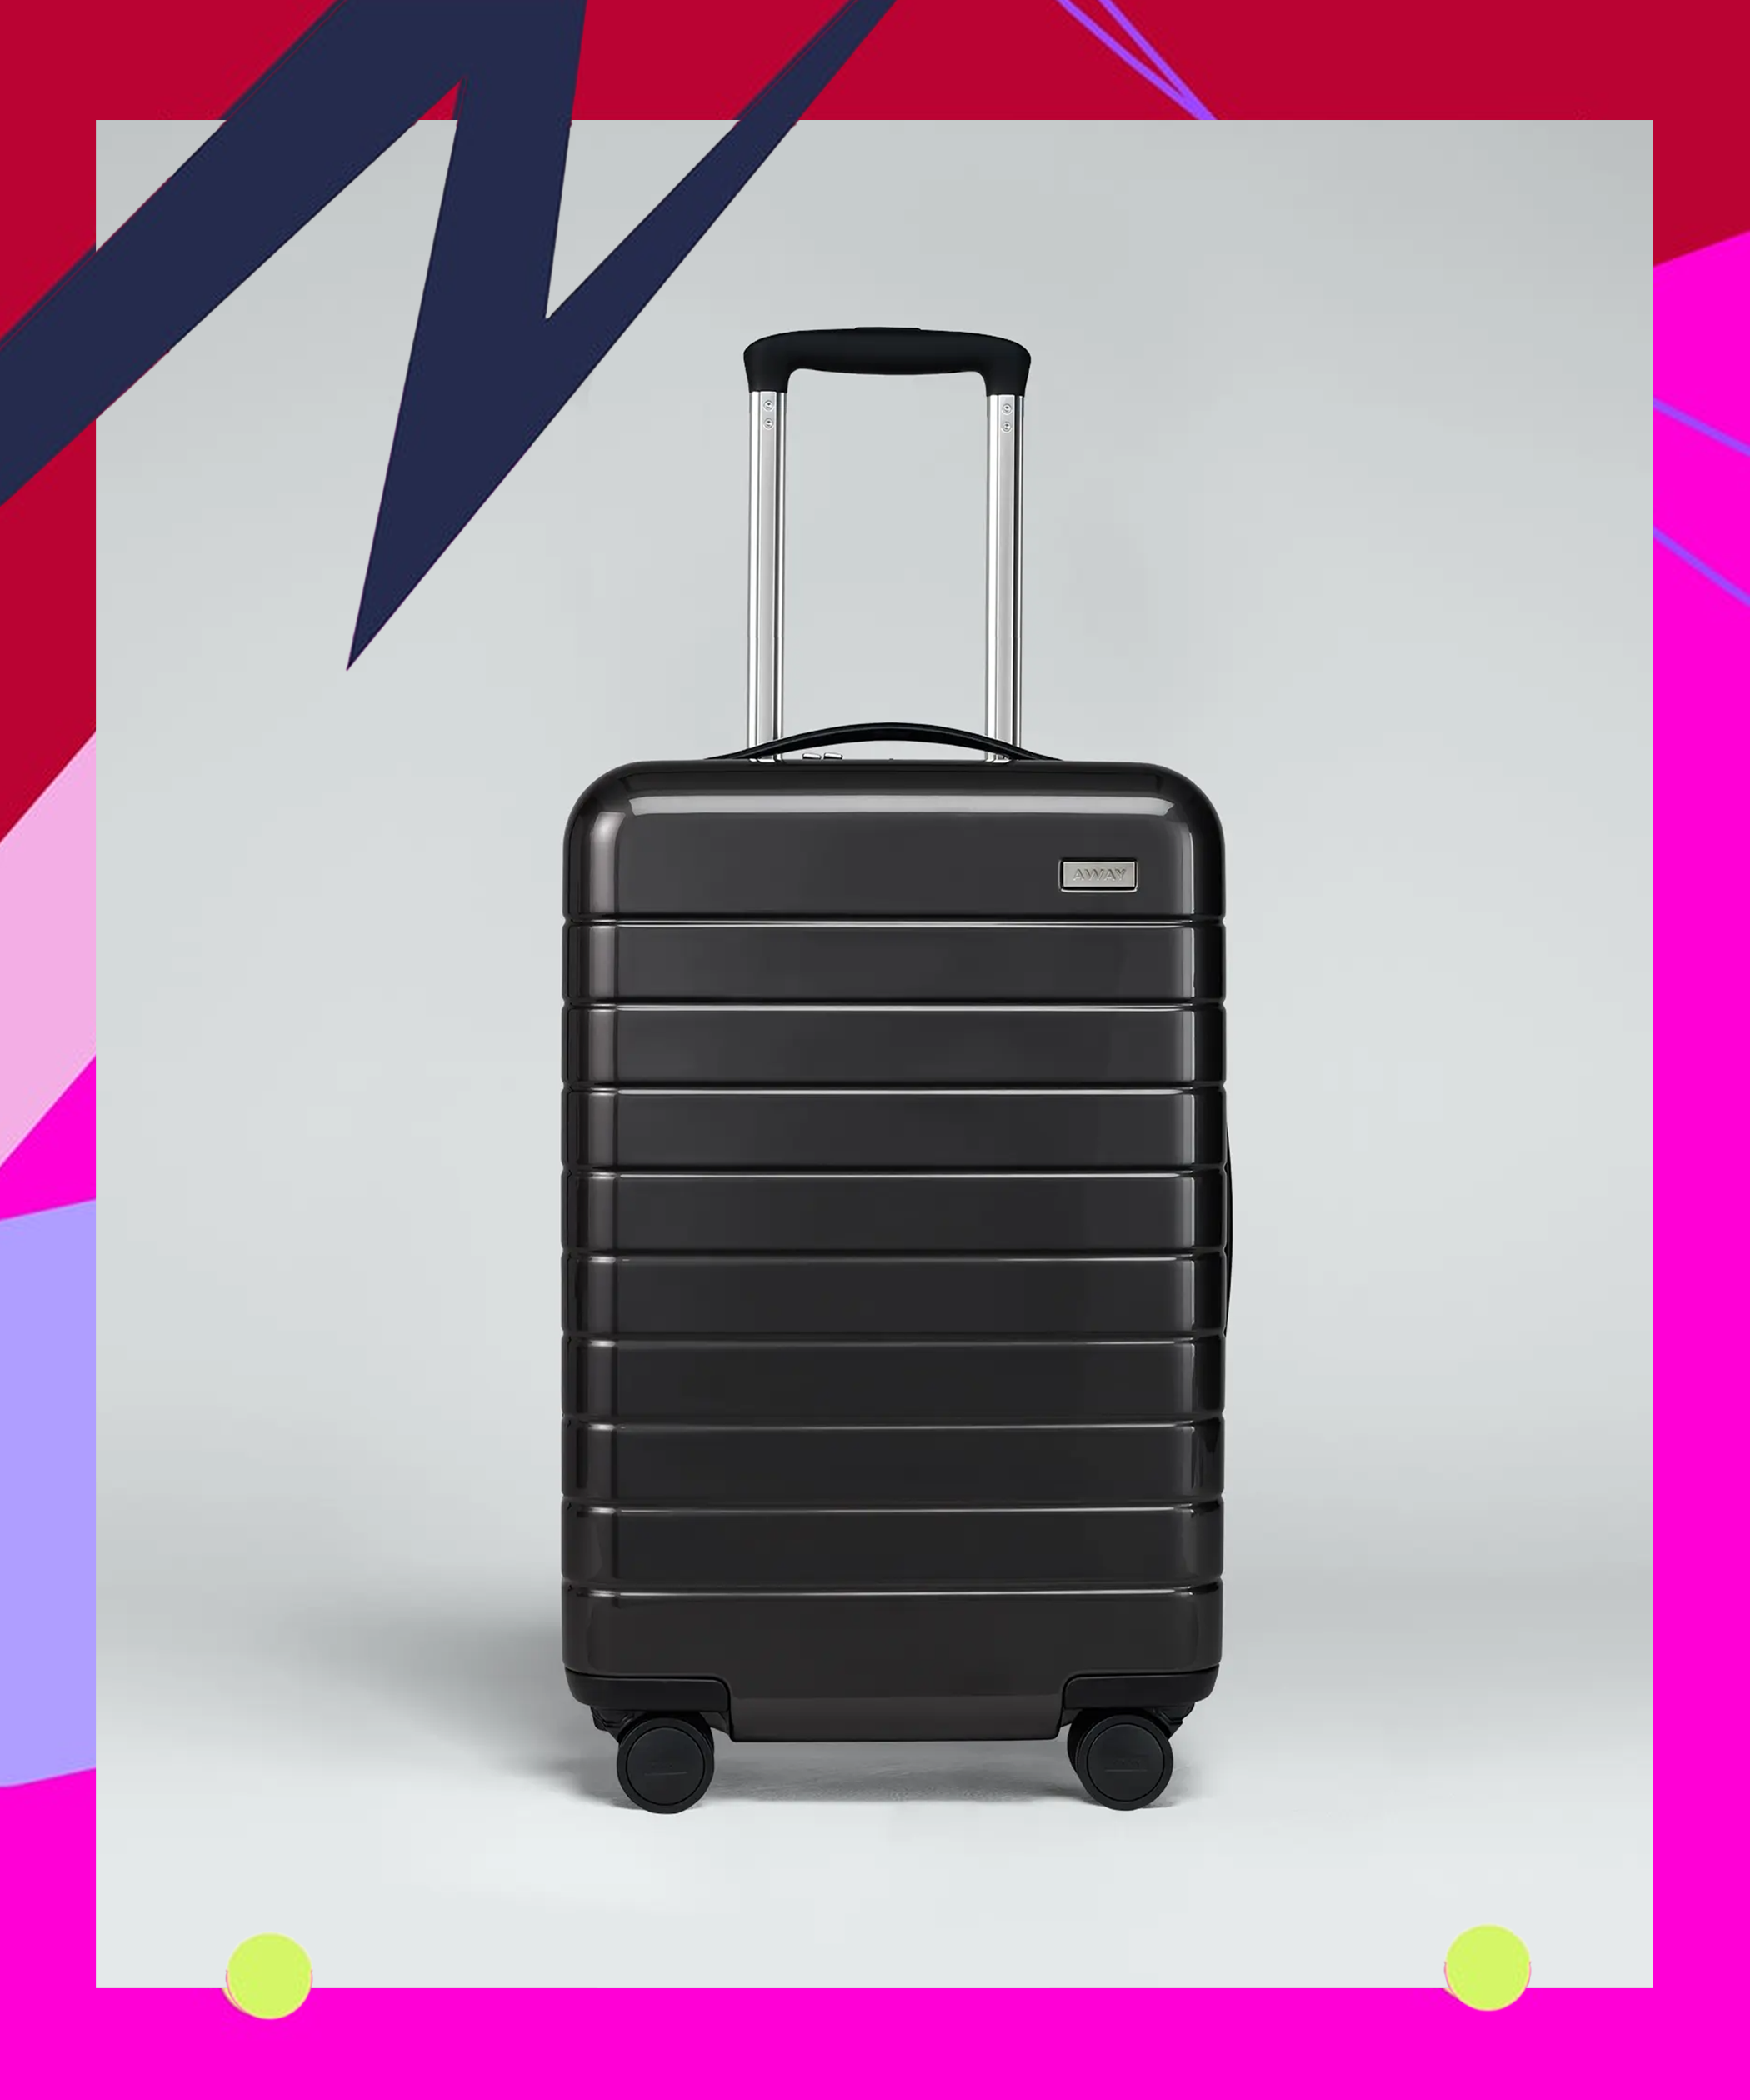 Away Suitcase Review - This Carry-On Piece of Luggage Makes Me an  Independent Traveler